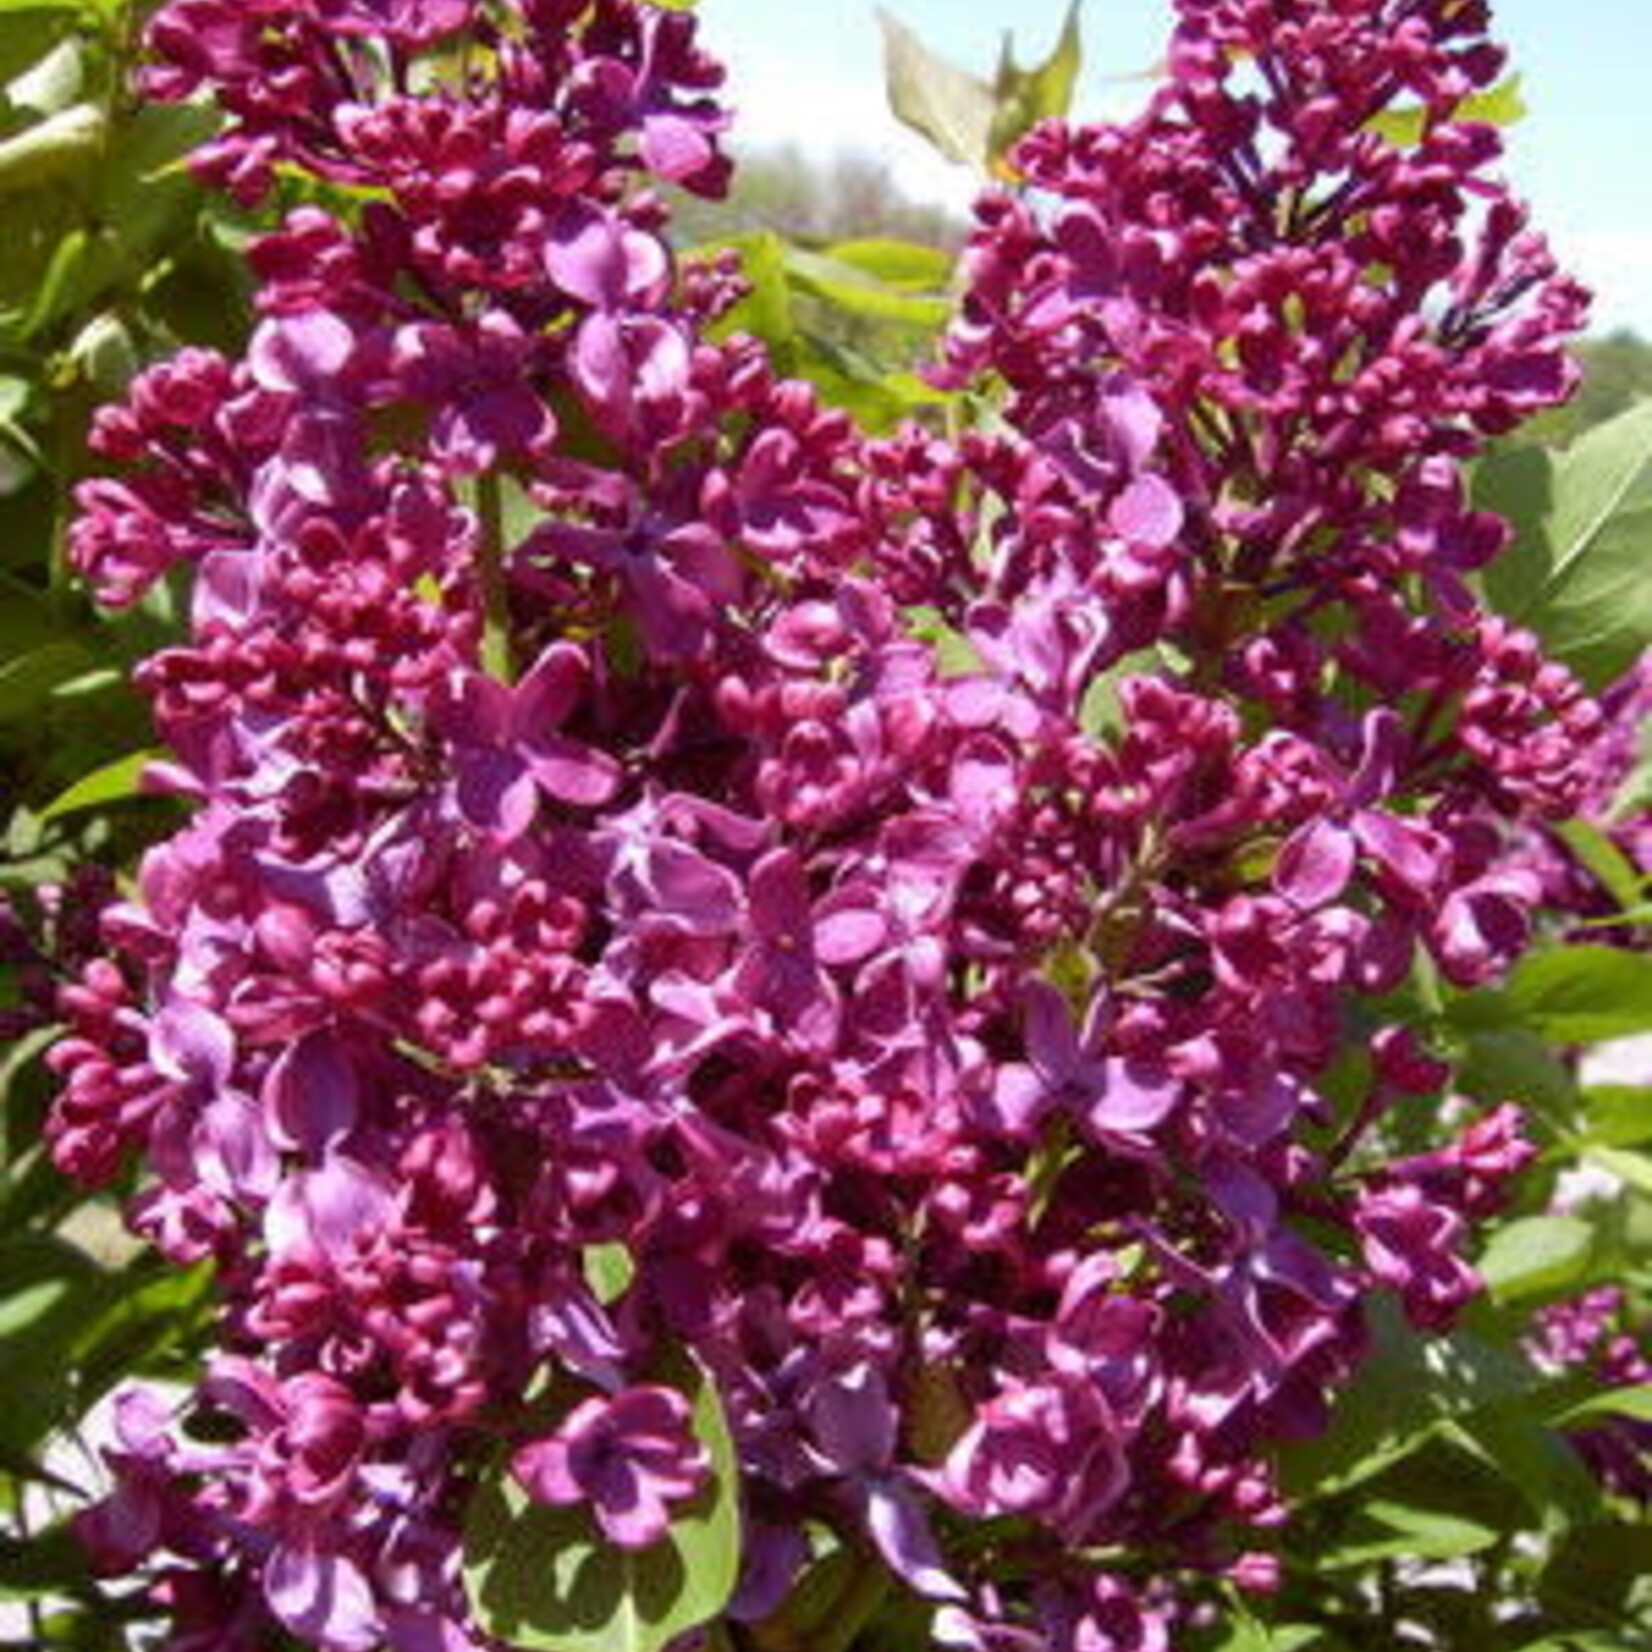 Monge (French Hybrid Common Lilac) 2G - Pink